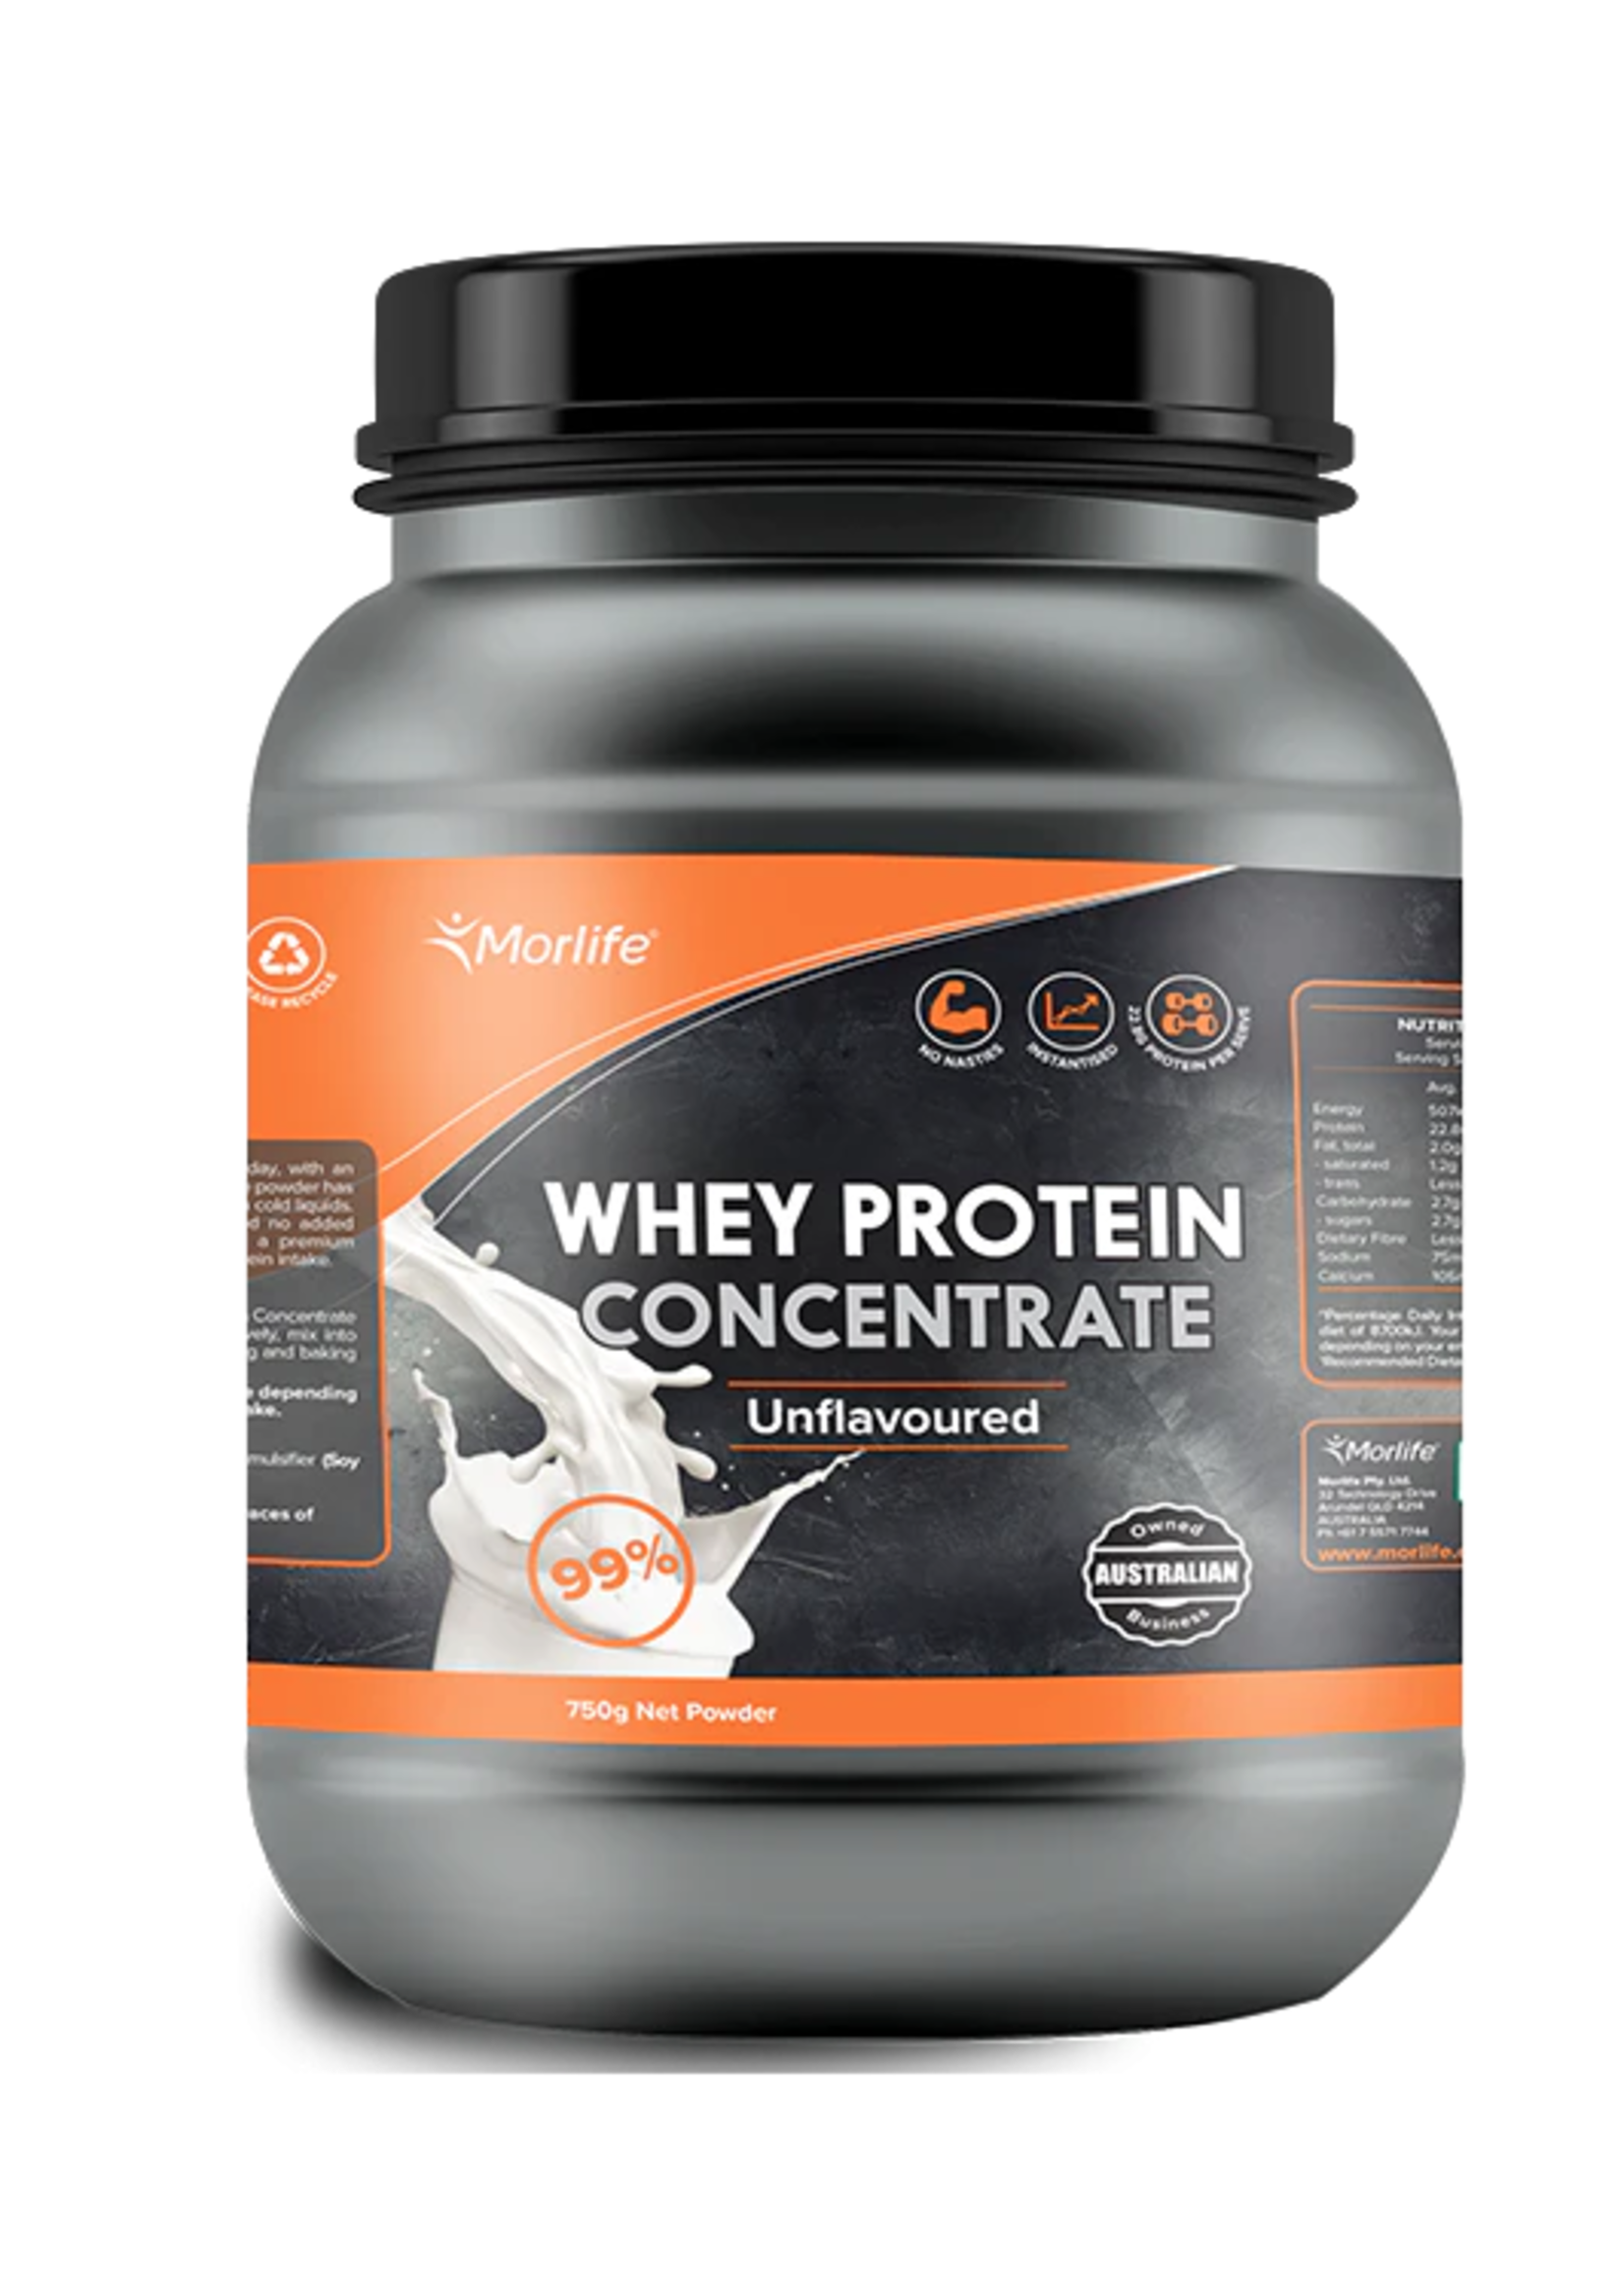 MORLIFE Morlife Whey Protein Concentrate Unflavoured 750gms